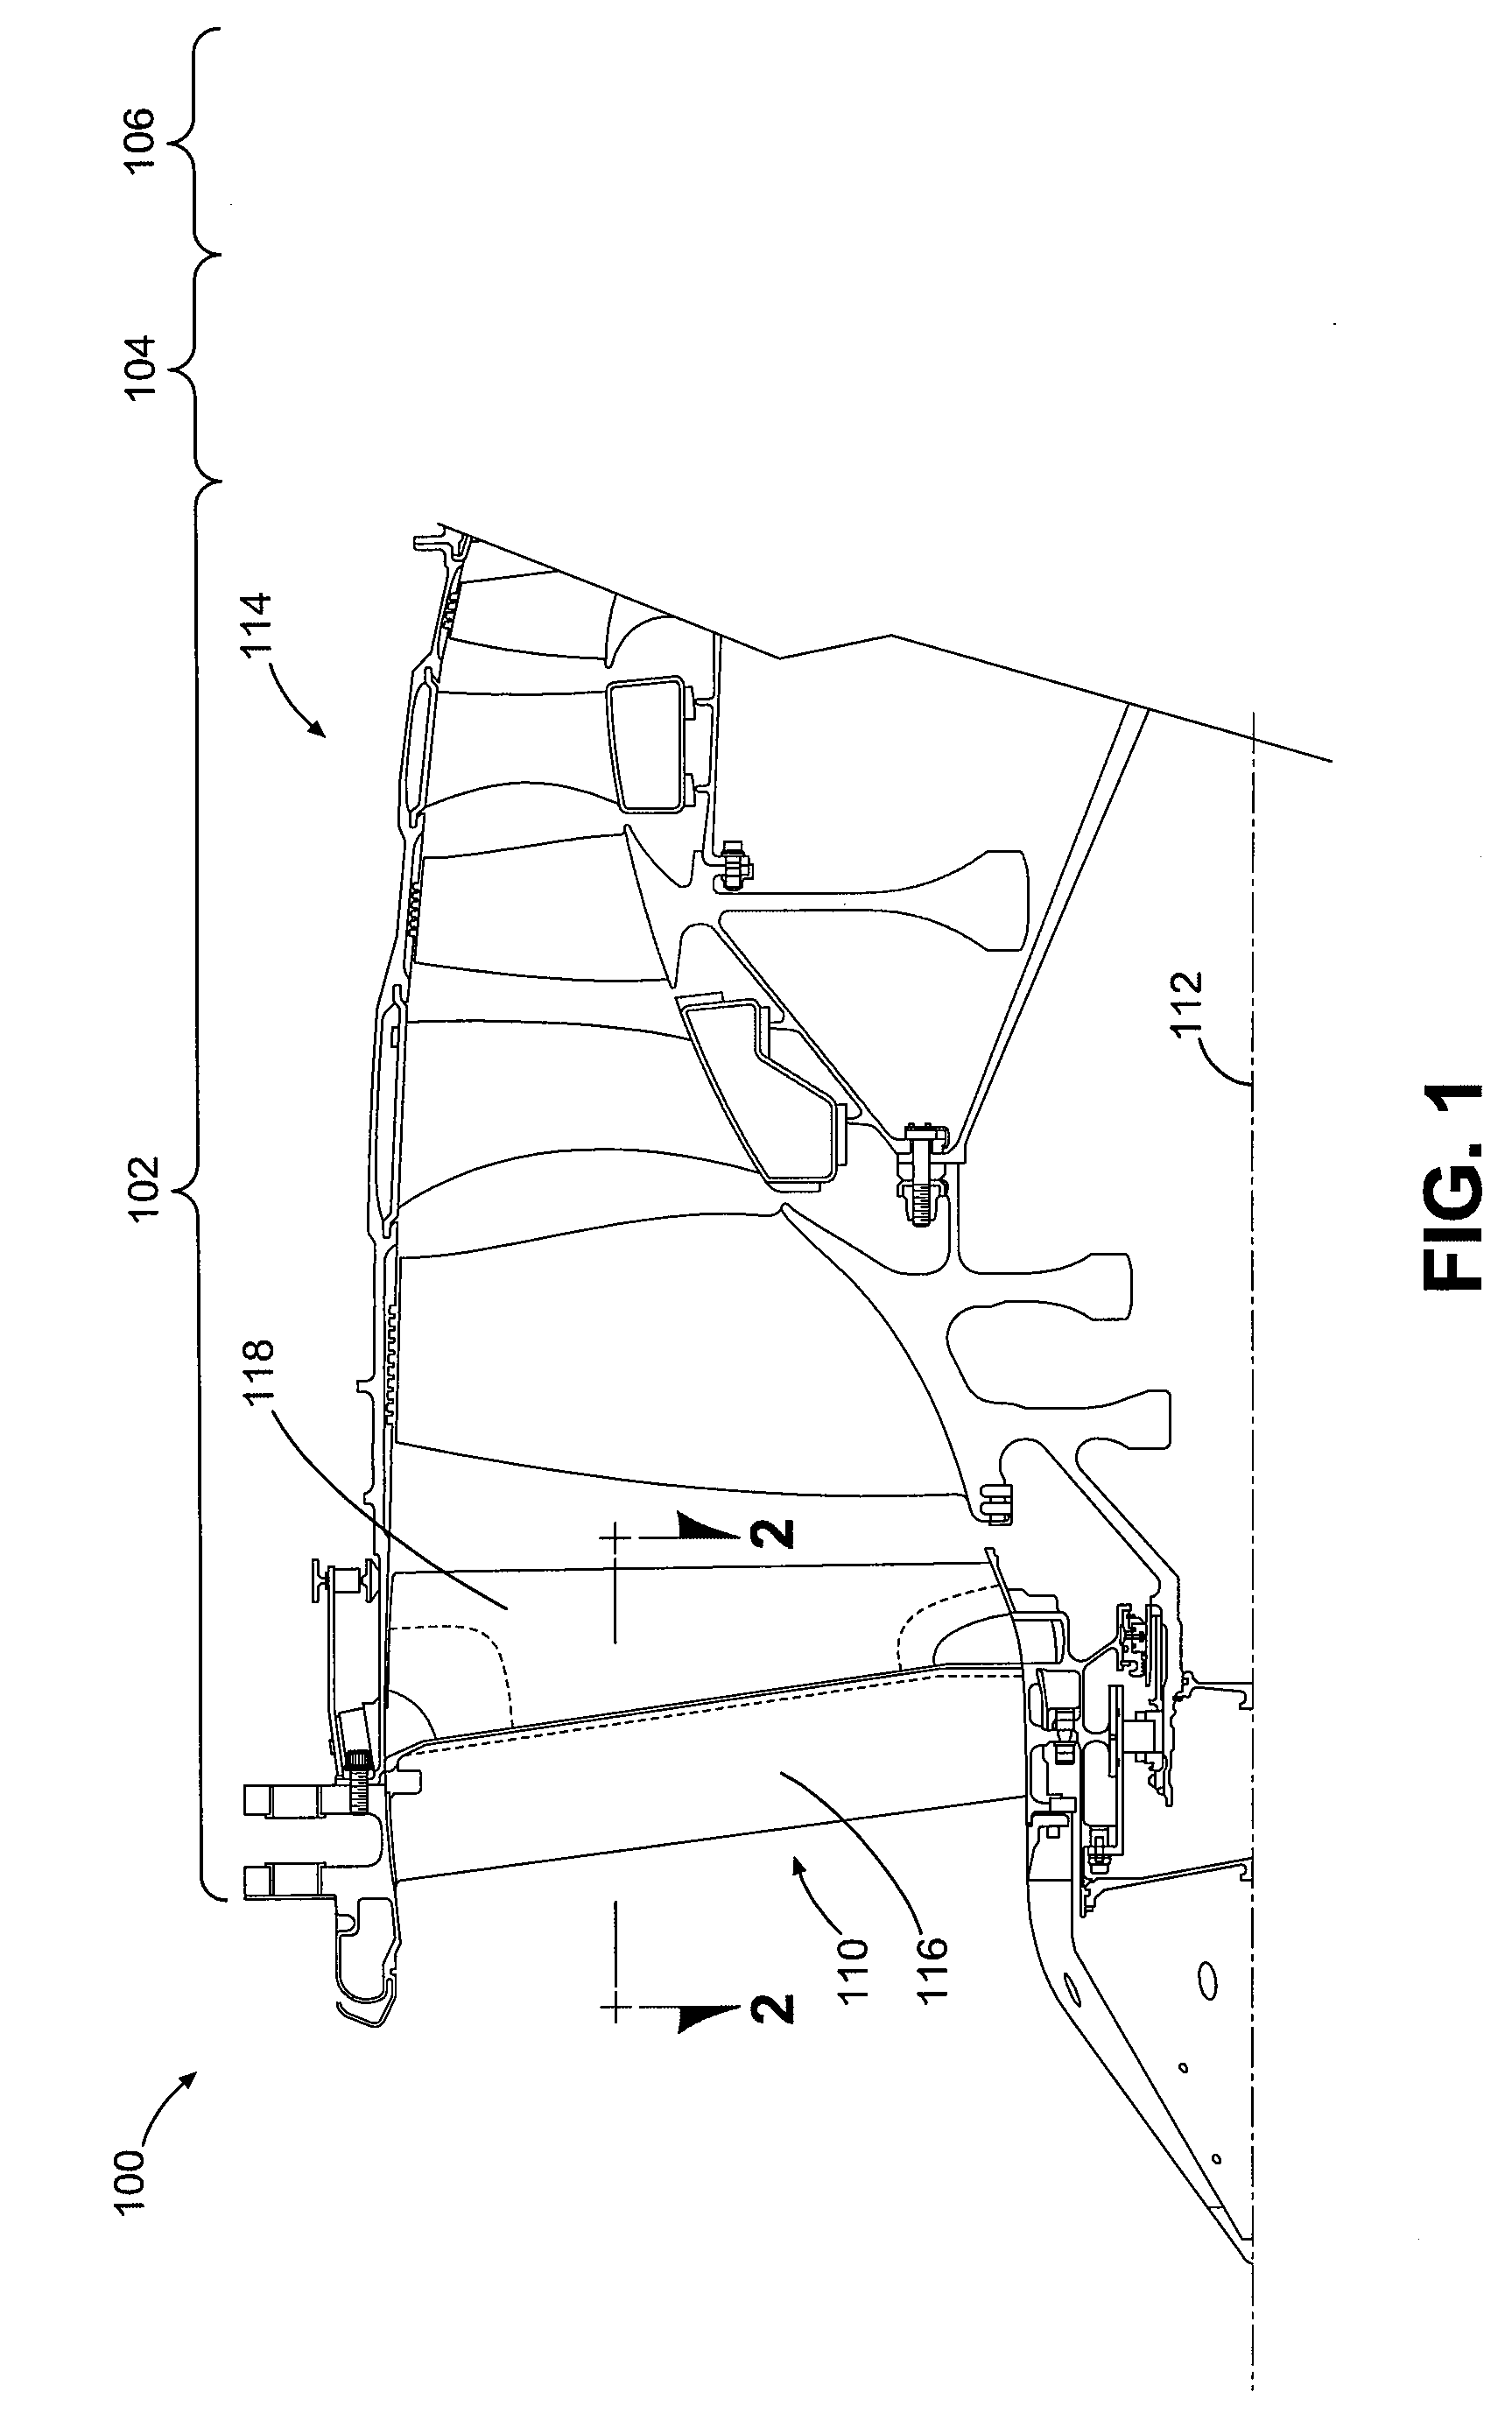 Inlet Guide Vanes and Gas Turbine Engine Systems Involving Such Vanes